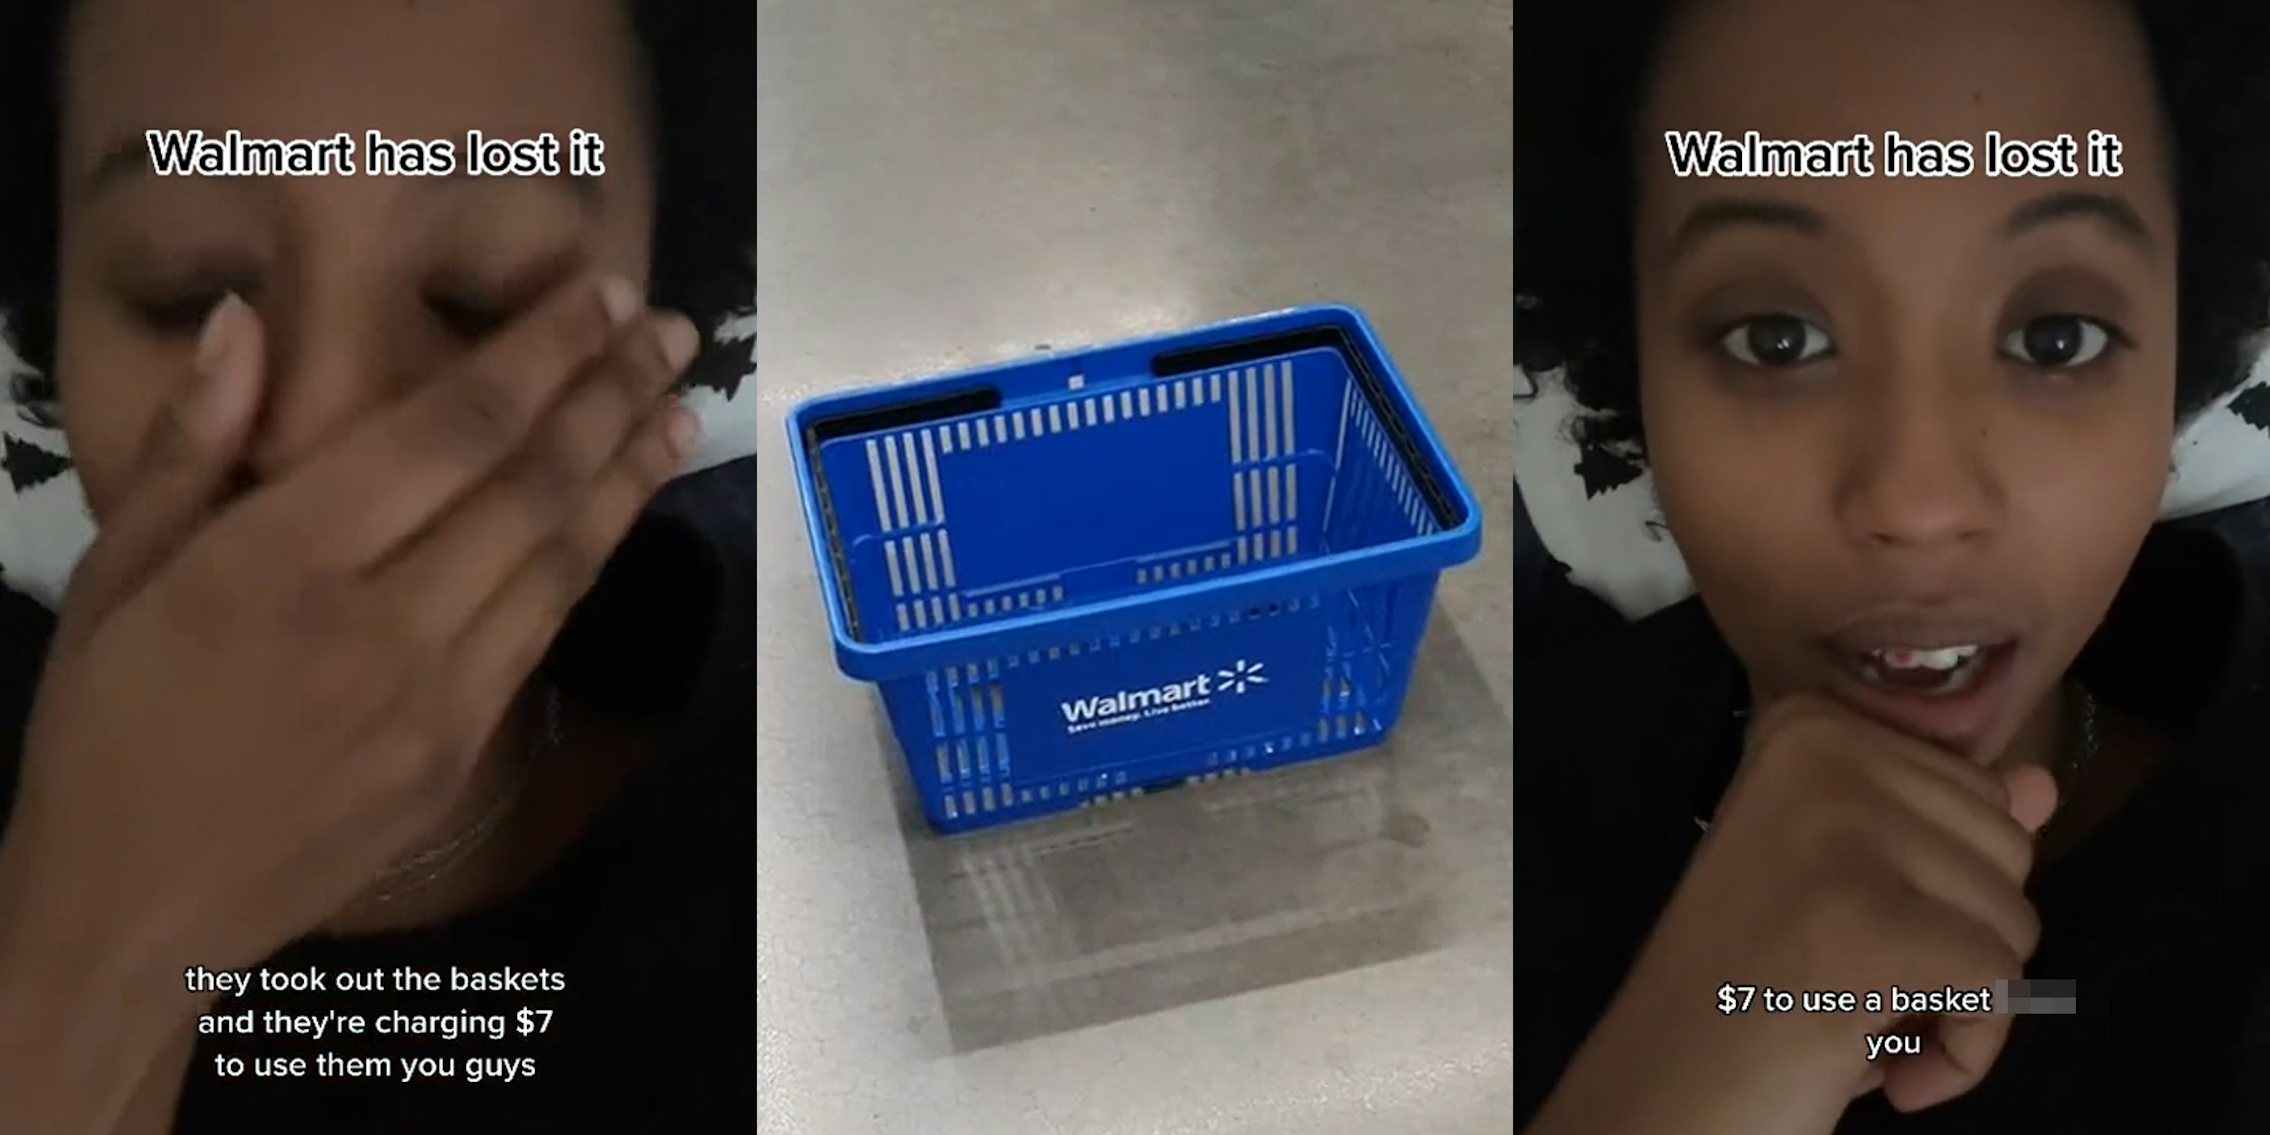 woman with hand on face with caption 'Walmart has lost it they took out the baskets and they're charging $7 to use them you guys' (l) Walmart shopping basket on floor (c) woman speaking with caption 'Walmart has lost it $7 to use a basket blank you' (r)